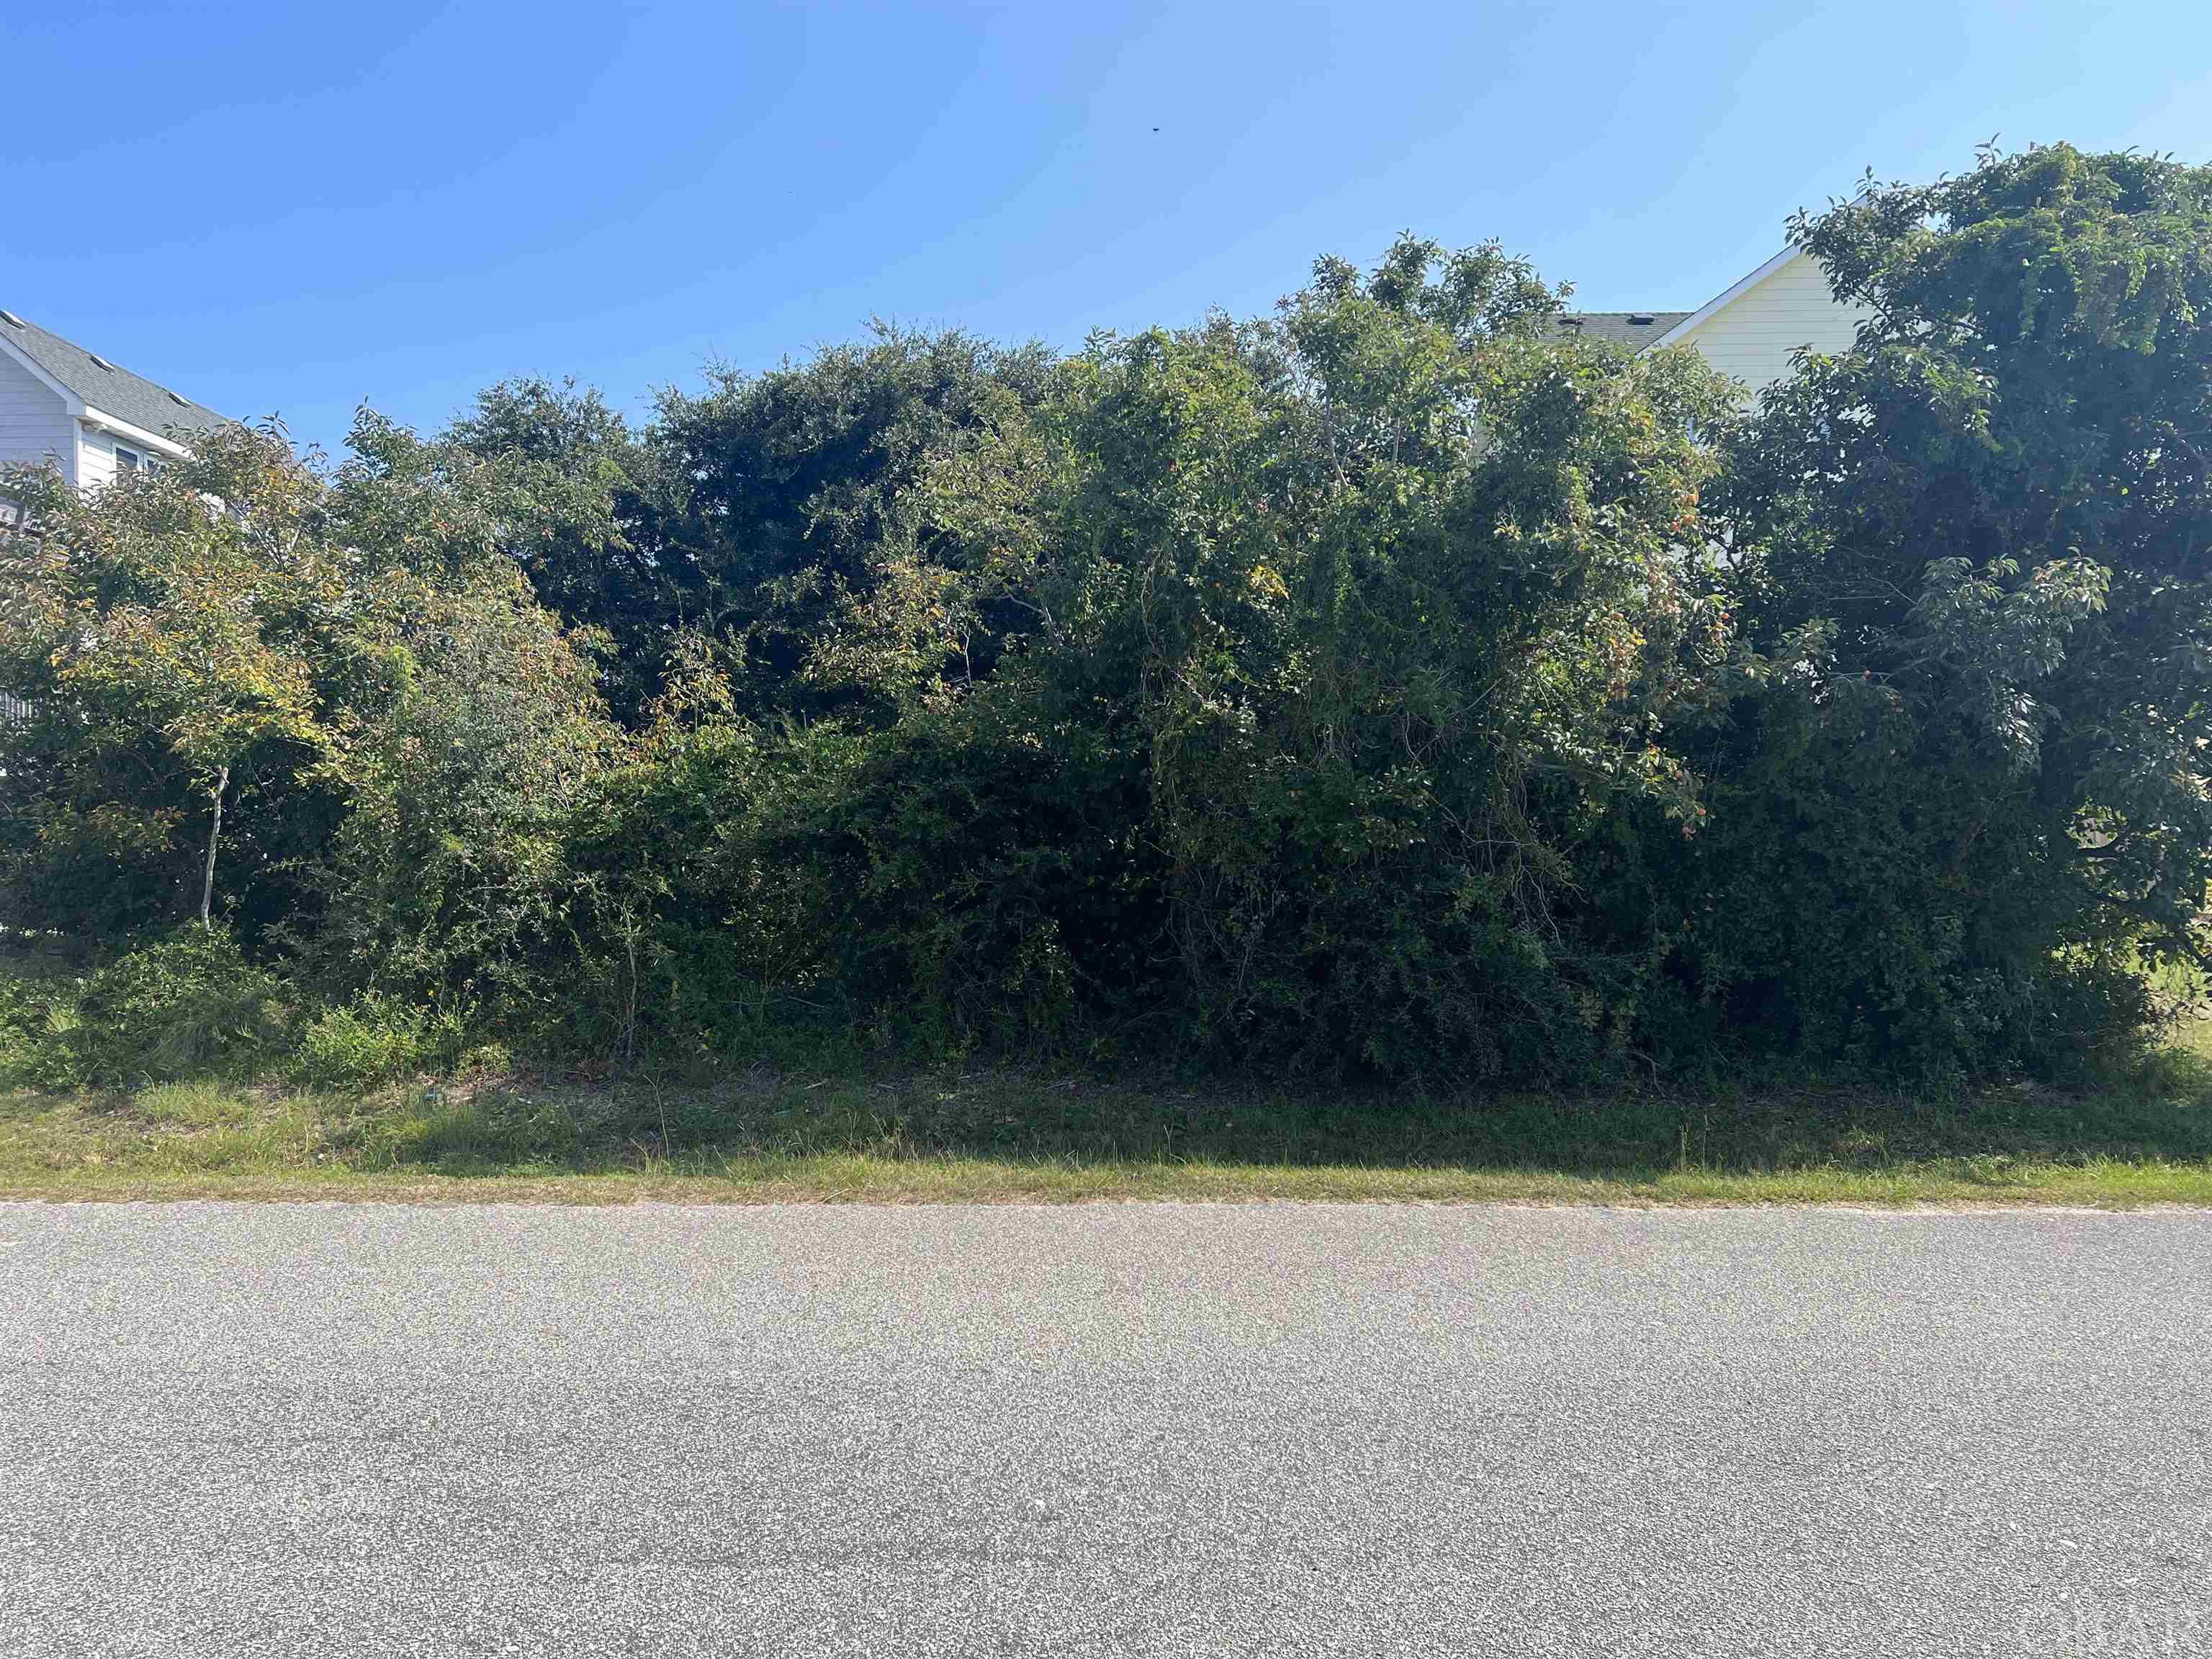 This vacant lot is located close to the beach. Perfect location for a home with in walking distance to the beach and might have an ocean view. Lots between the highways are hard to find so you better hurry on this one.